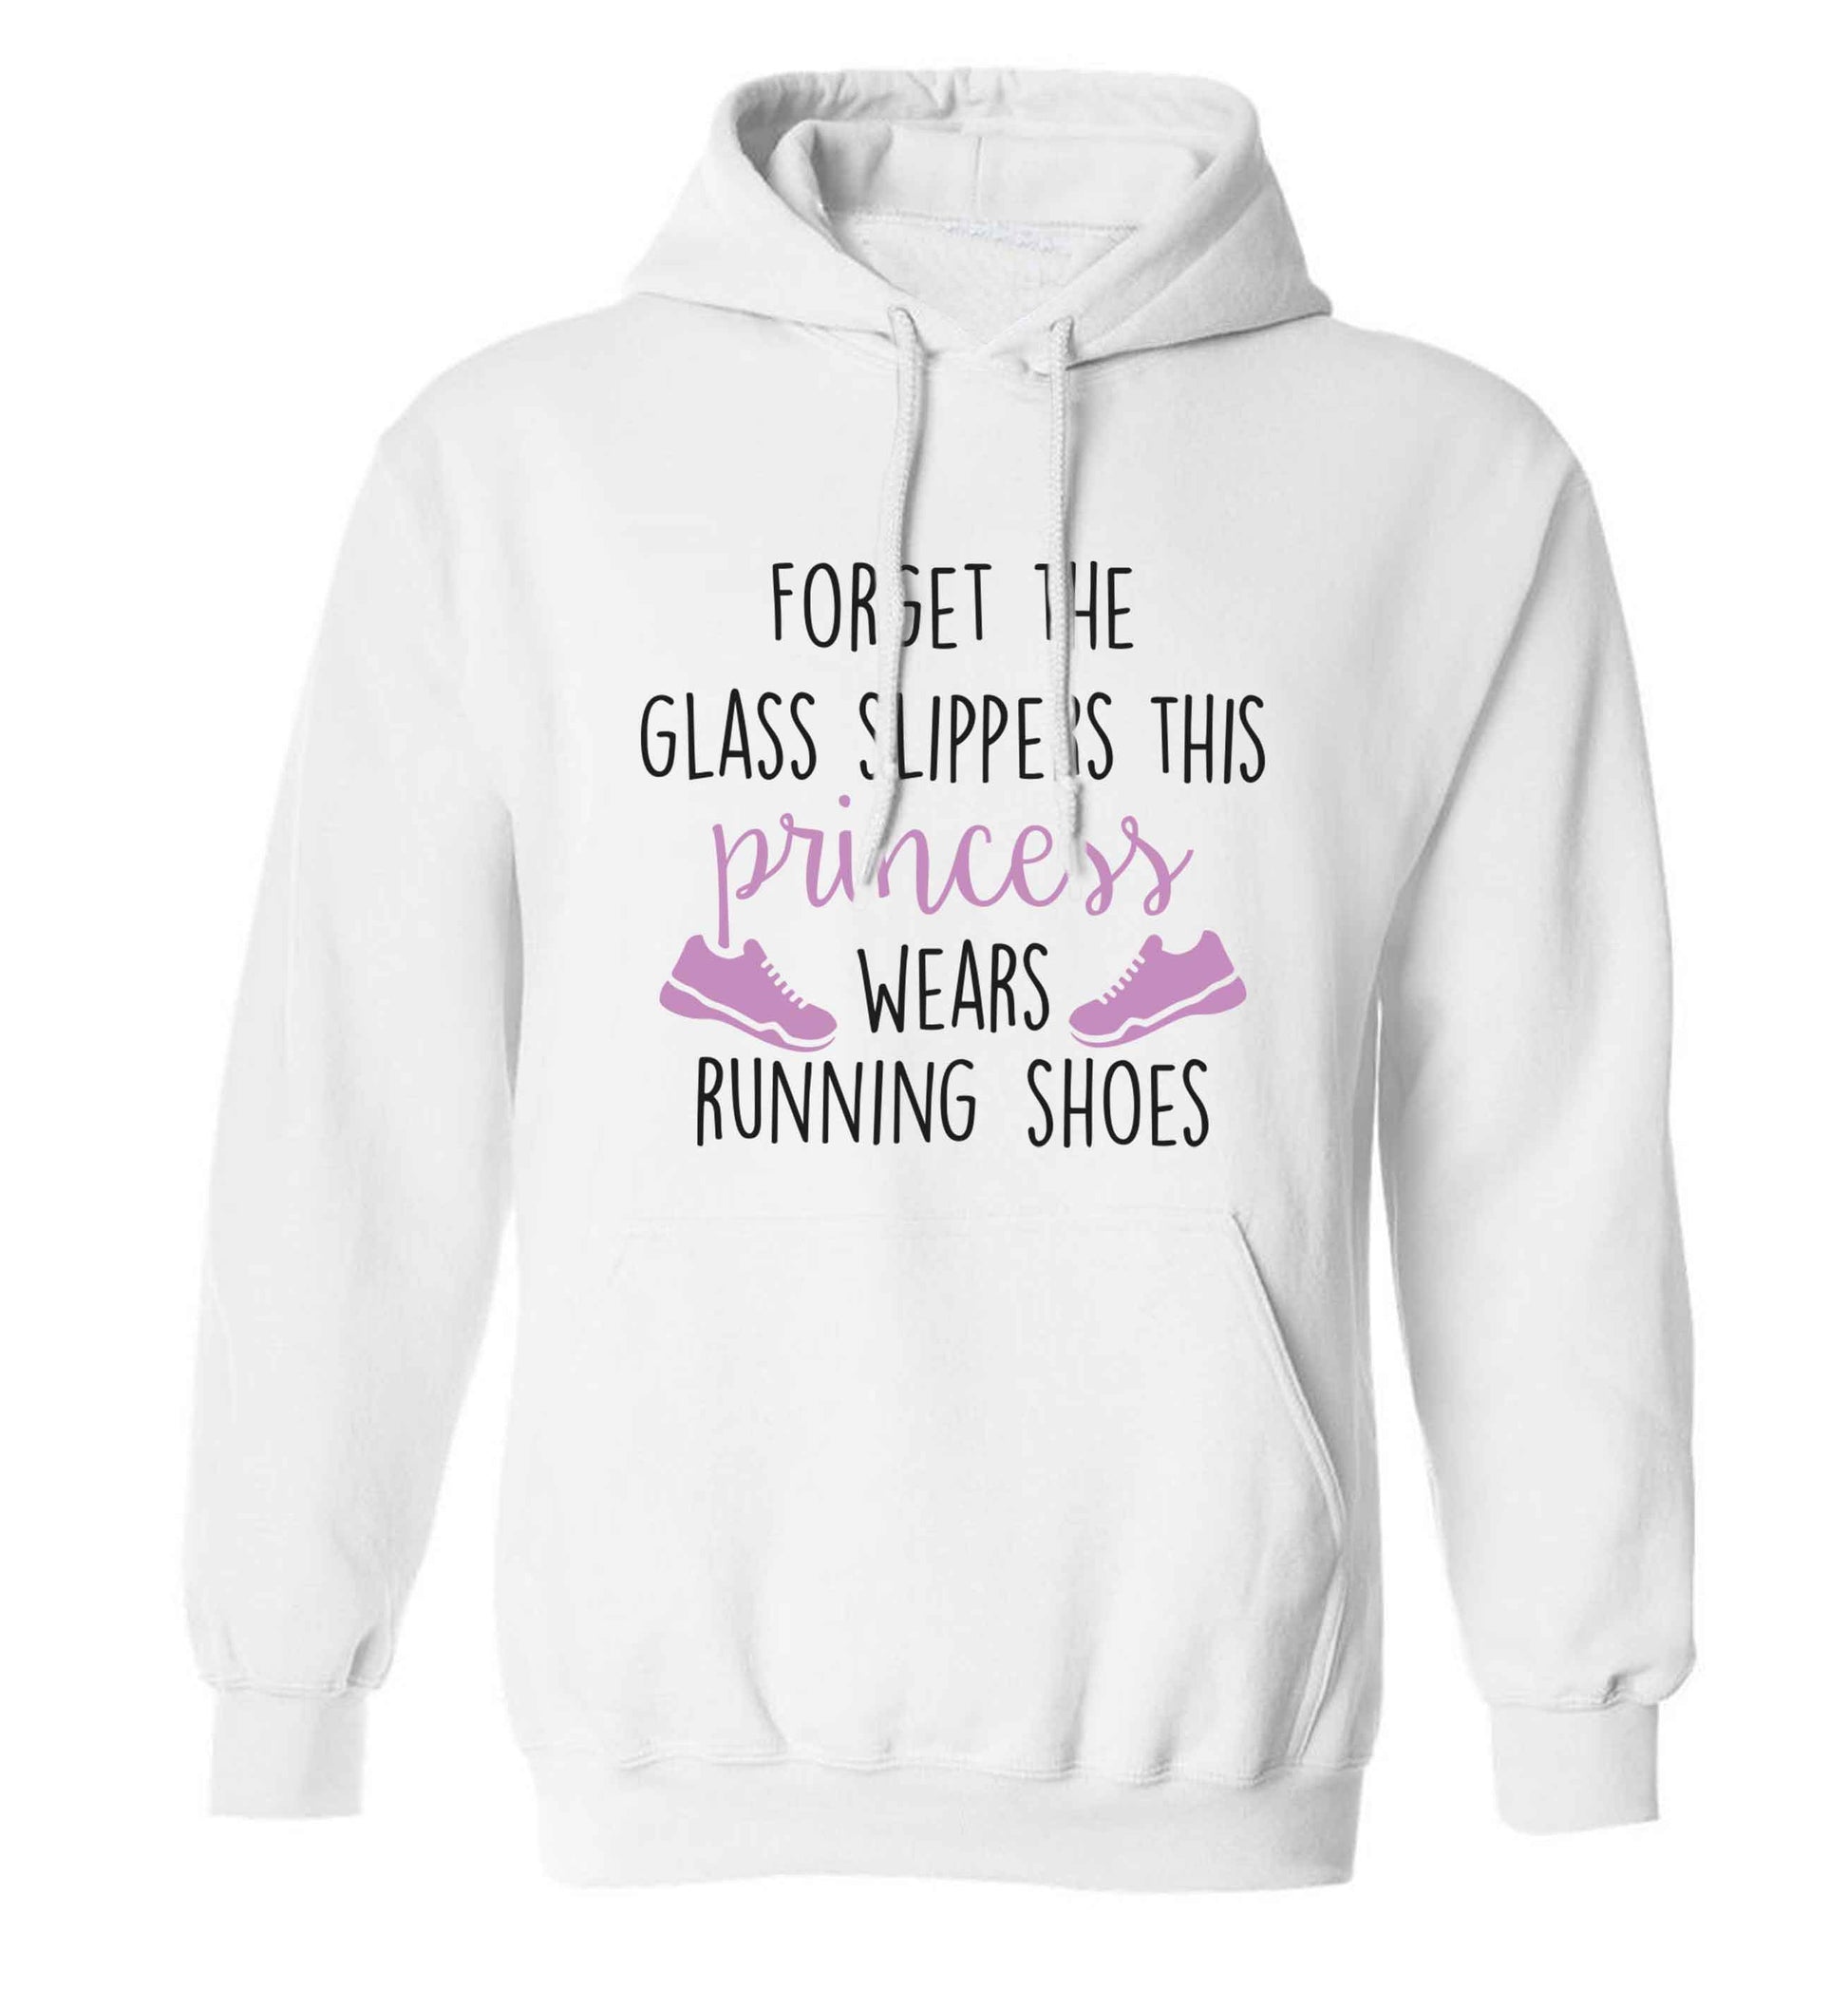 Forget the glass slippers this princess wears running shoes adults unisex white hoodie 2XL